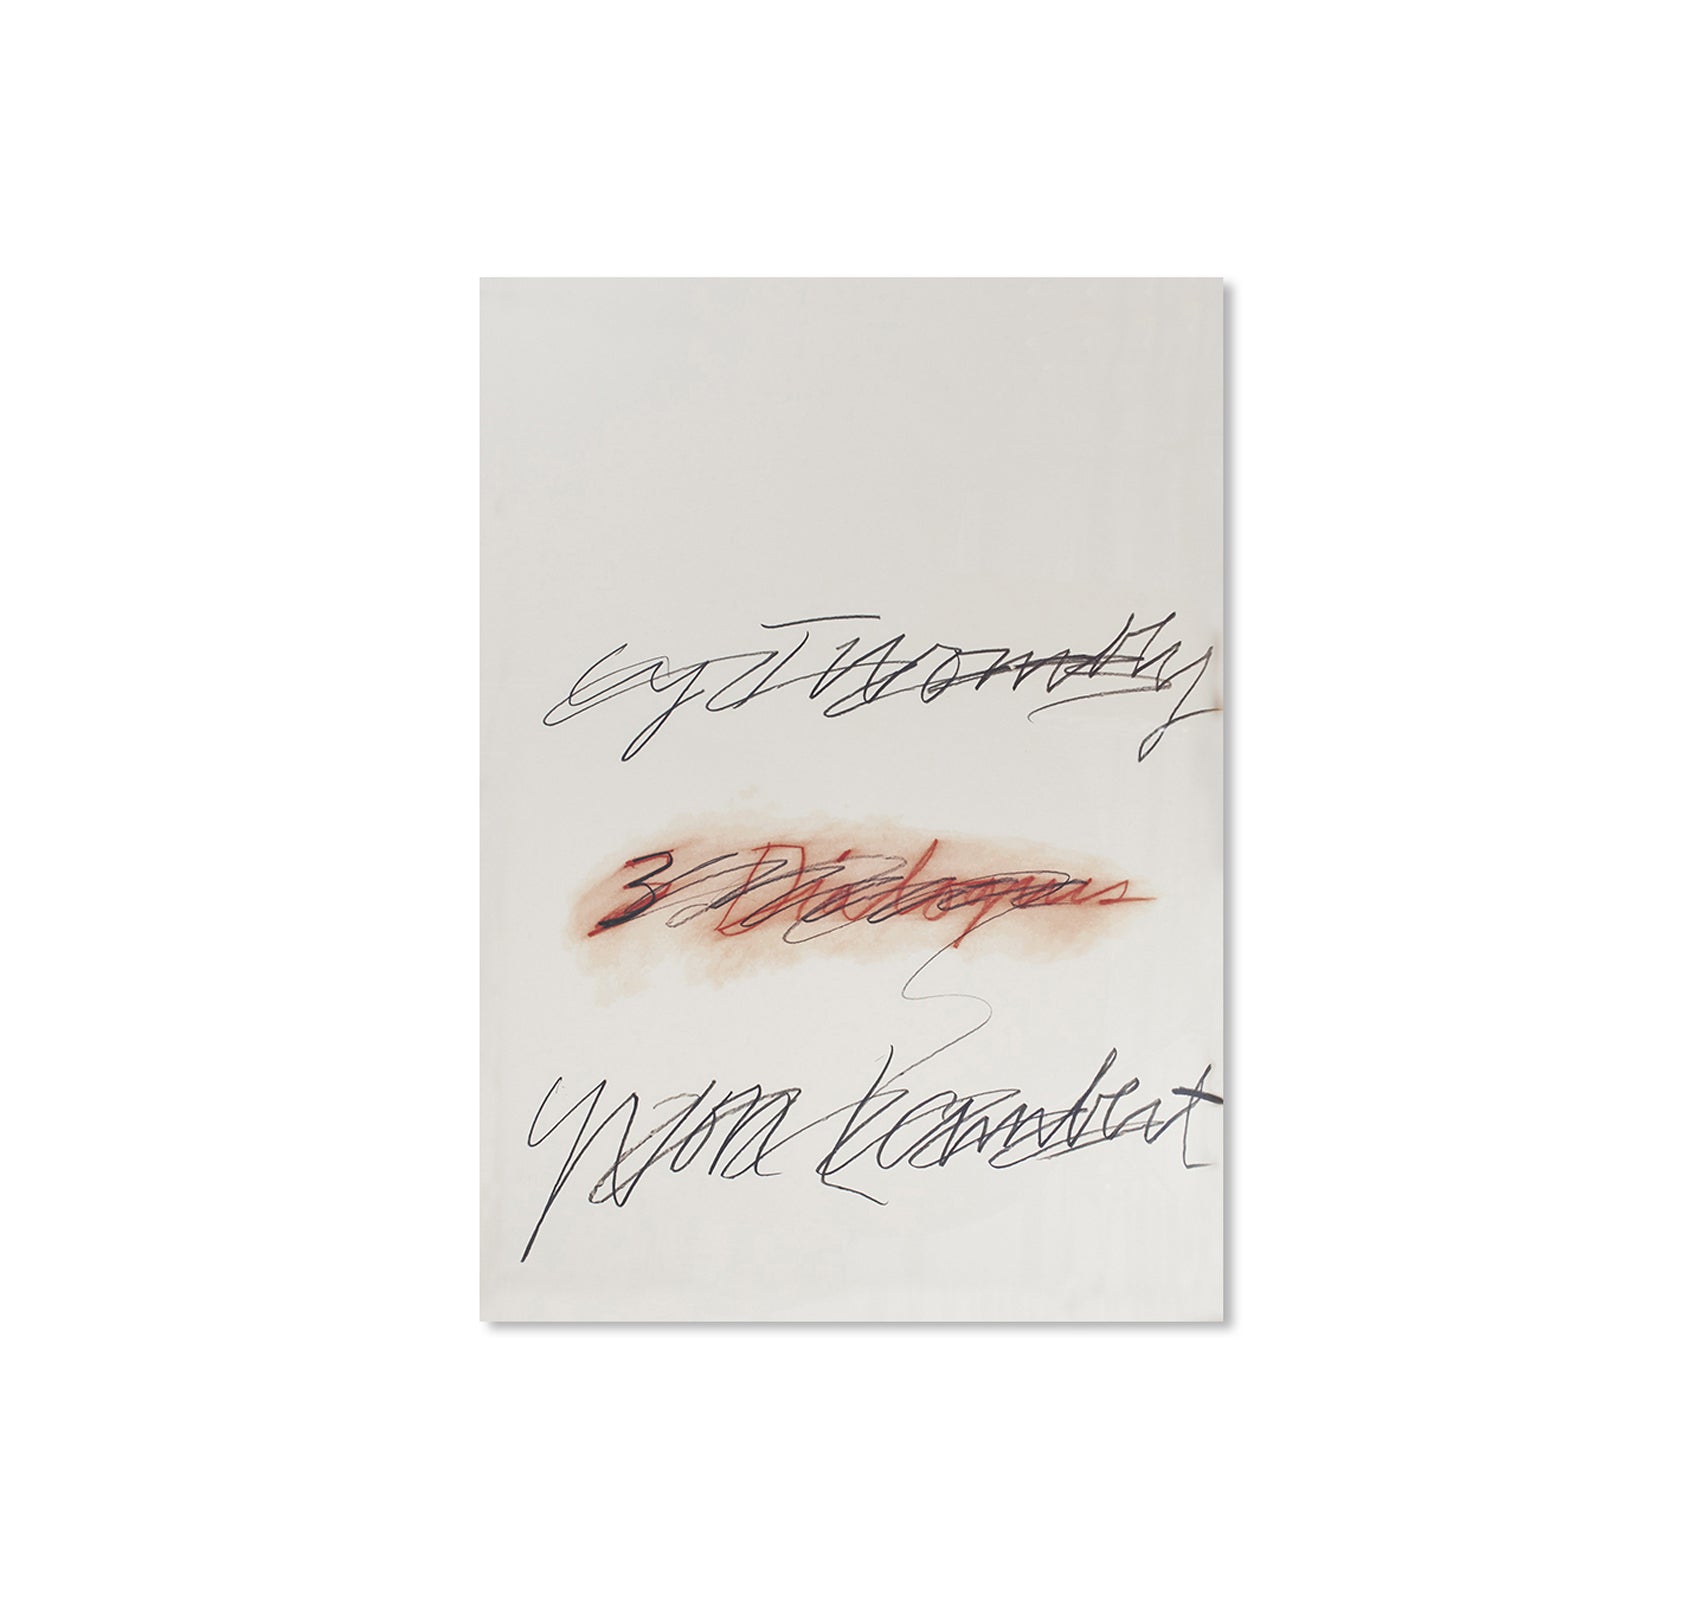 THREE DIALOGUES.2 PRINT (1977) by Cy Twombly [REPRINTED EDITION]